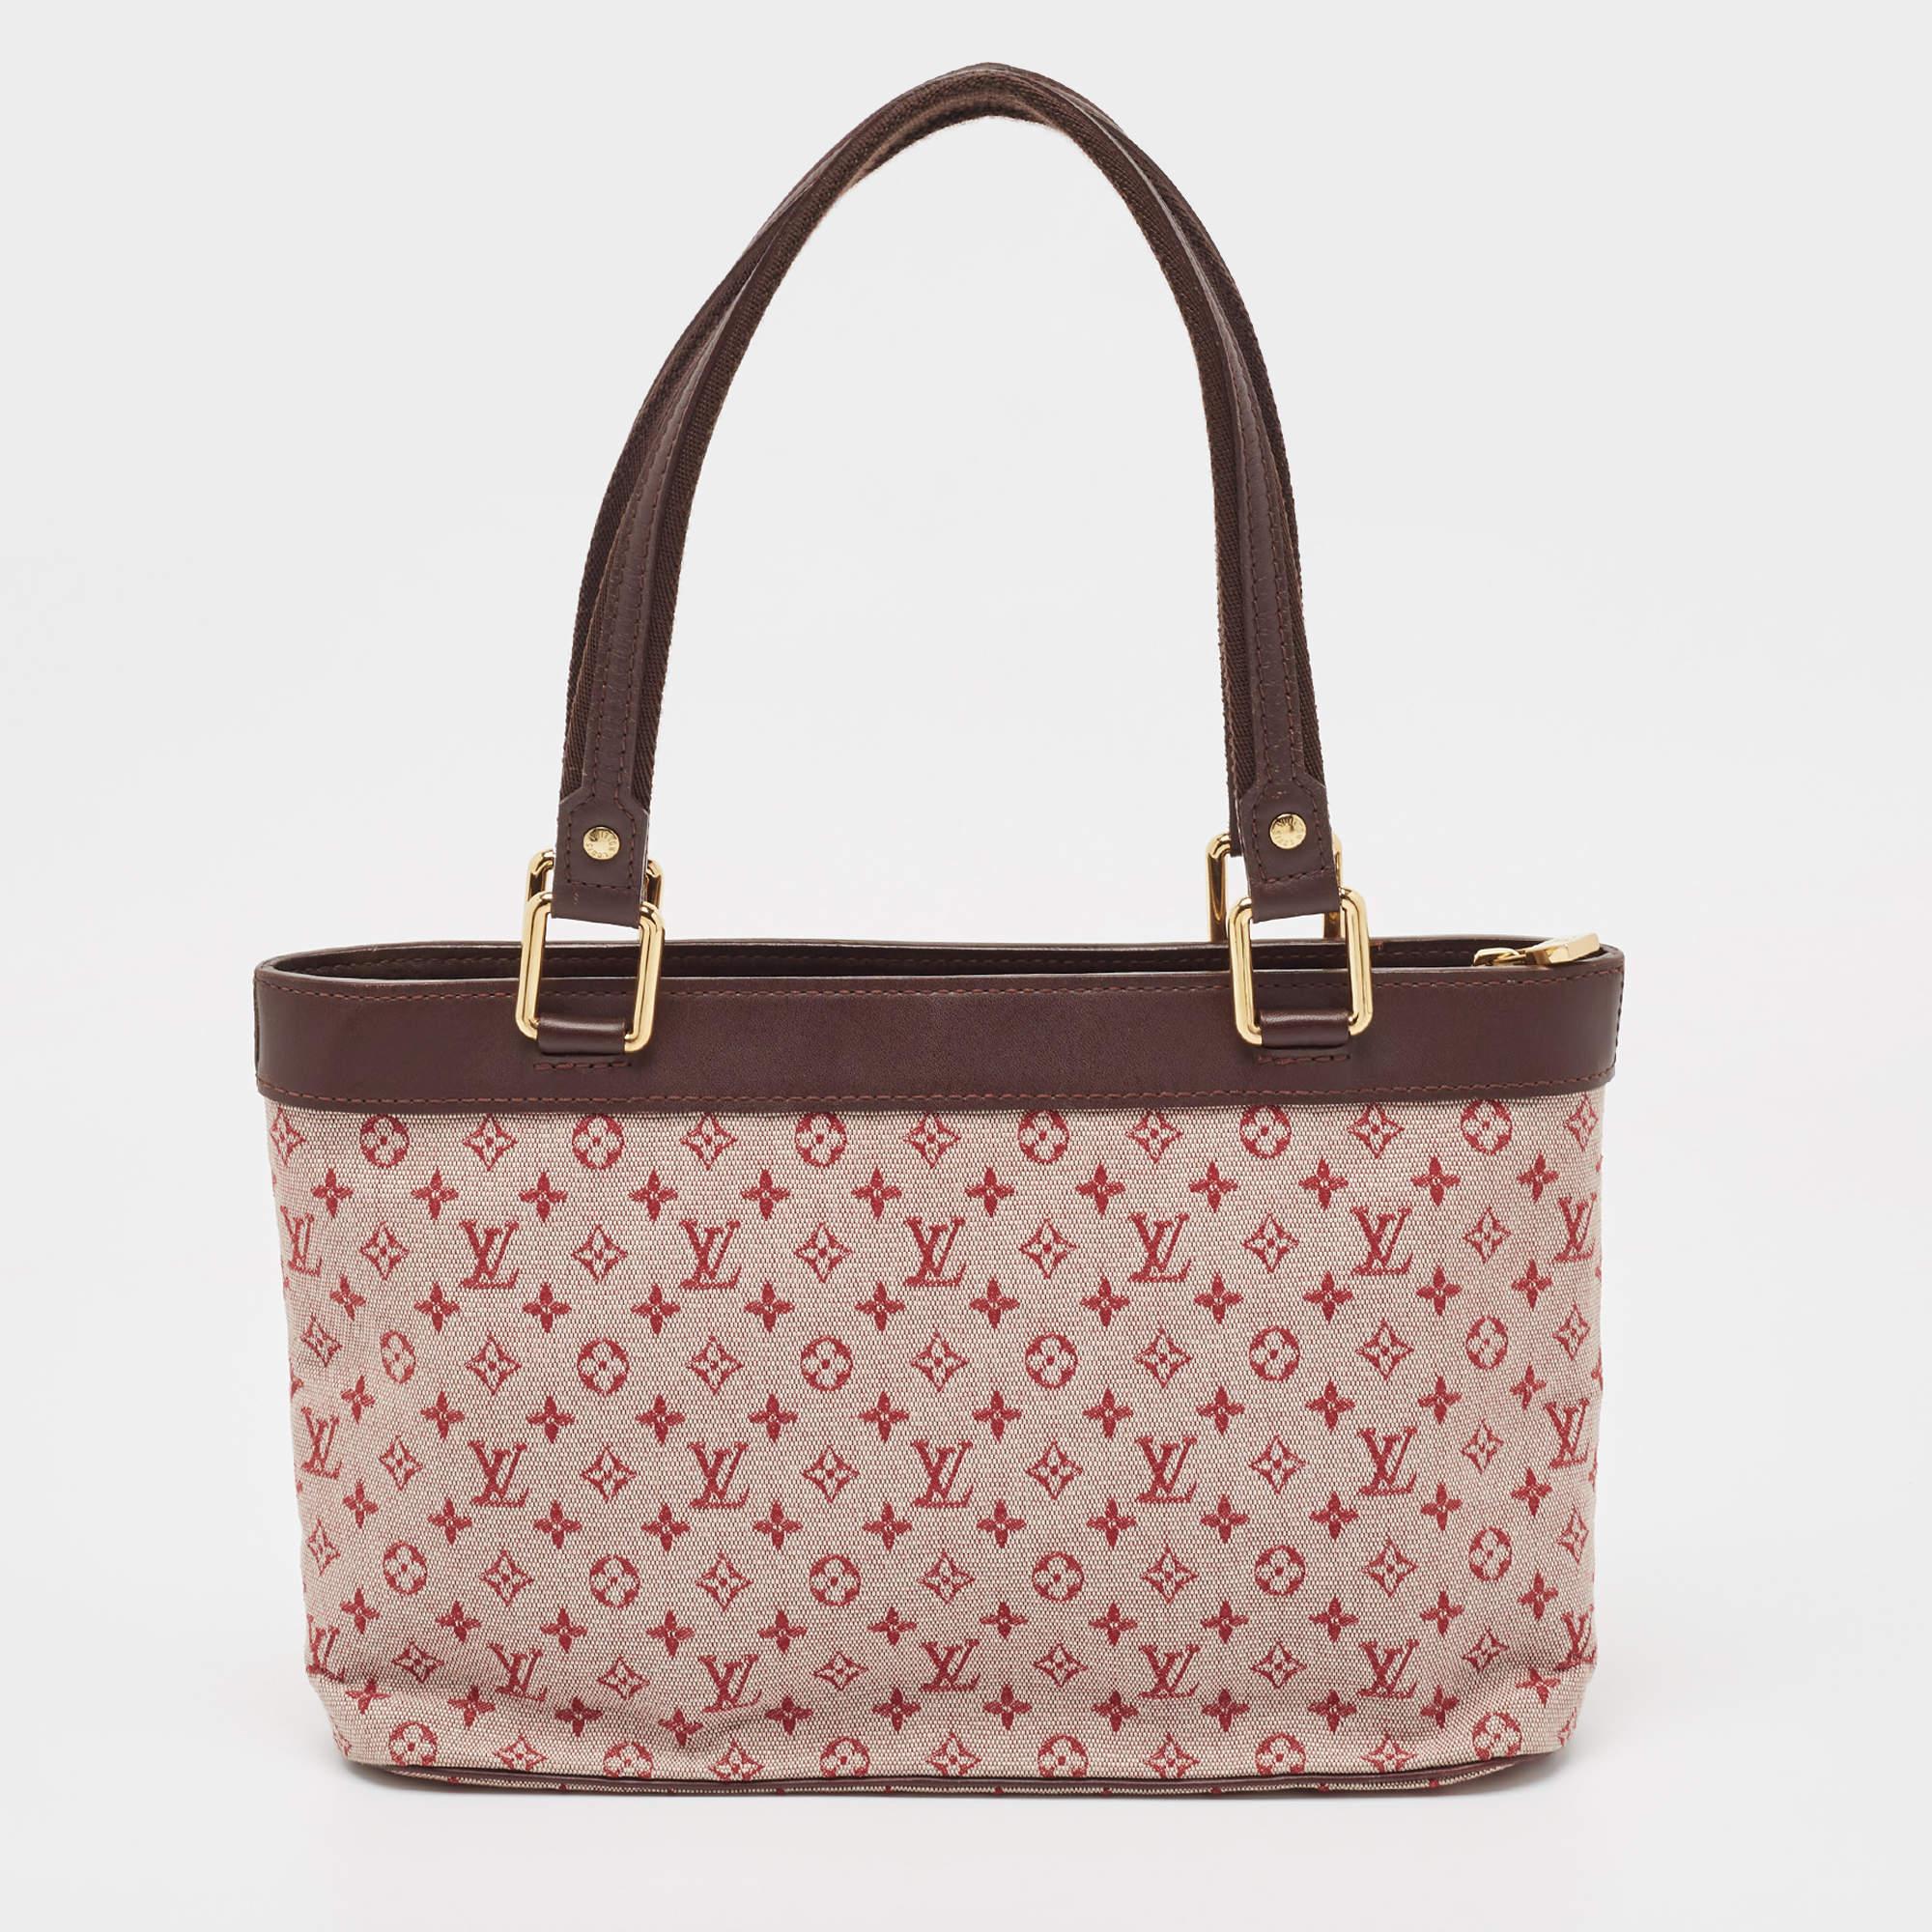 The house of Louis Vuitton offers this beautiful Mini Lin Lucille PM TST bag in pink to help you create timeless style edits every season. Crafted with quality materials, this piece will last you a long time.

